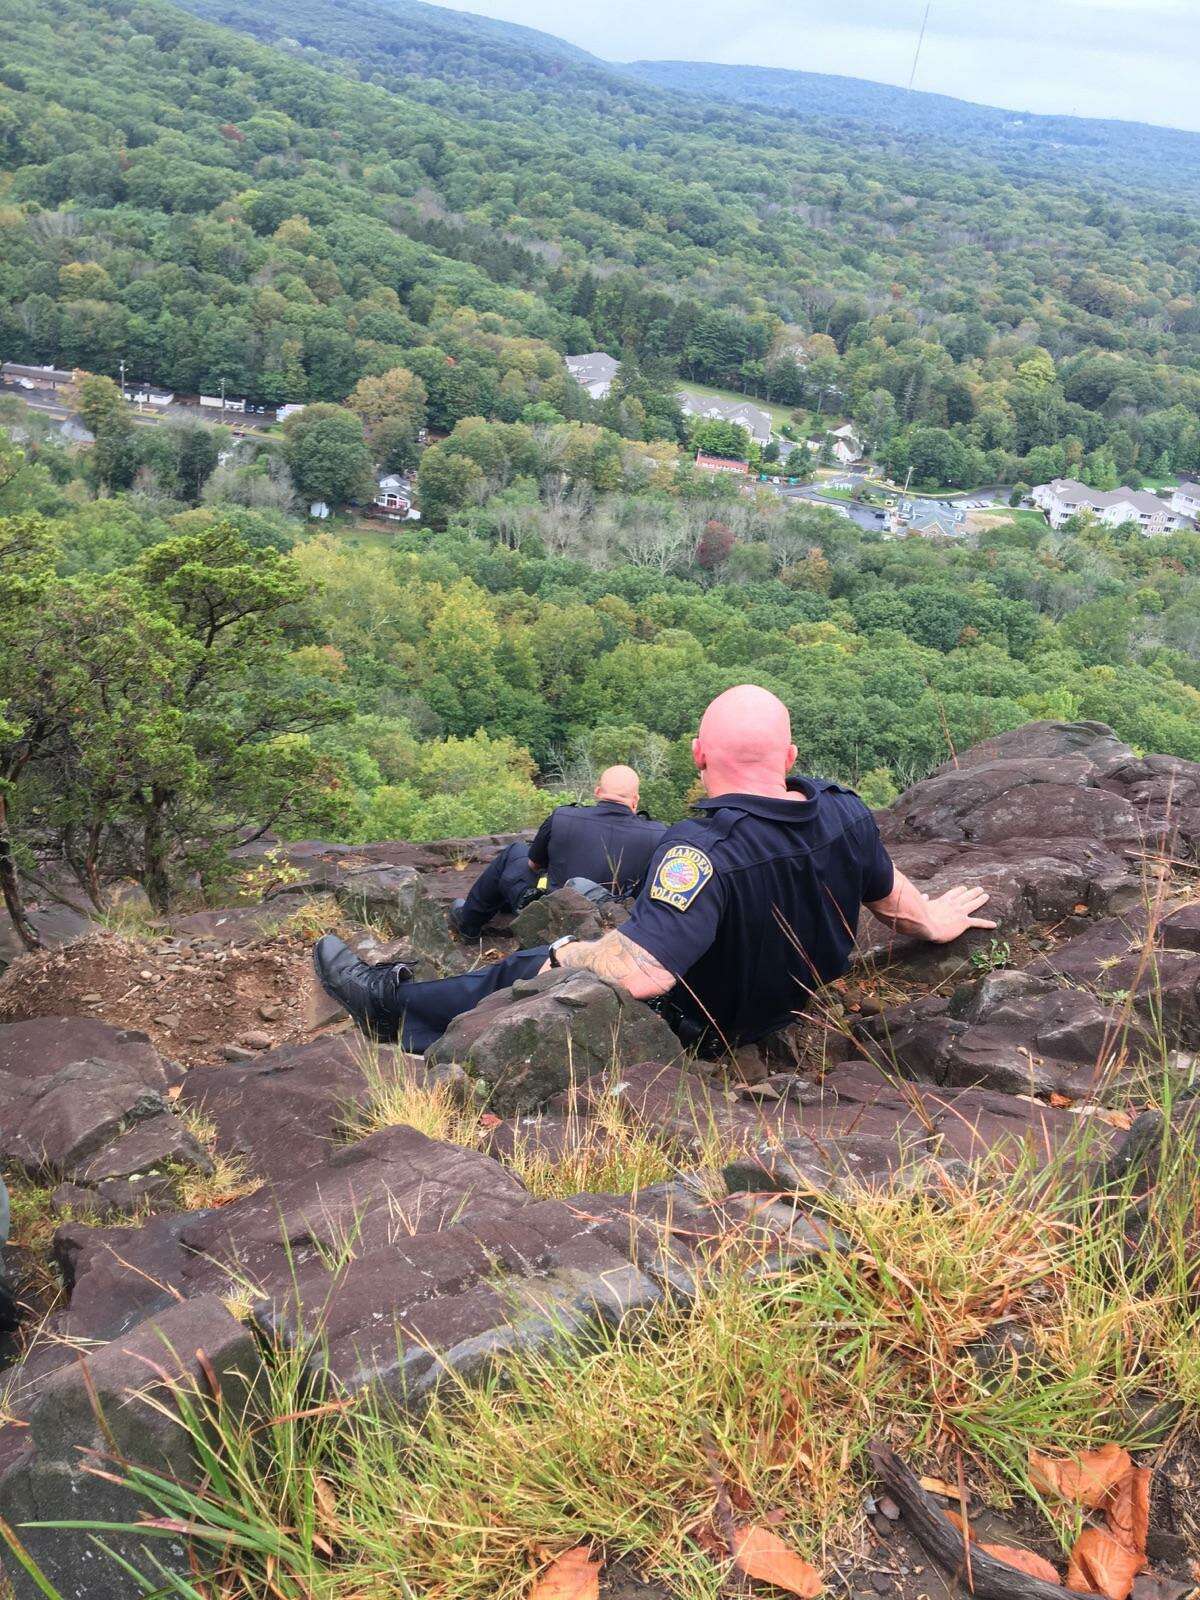 Hamden Police officers Paul Calamita and Timothy Mckeon on Sleeping Giant mountain talking to a distraught woman sitting at the edge of the cliff.